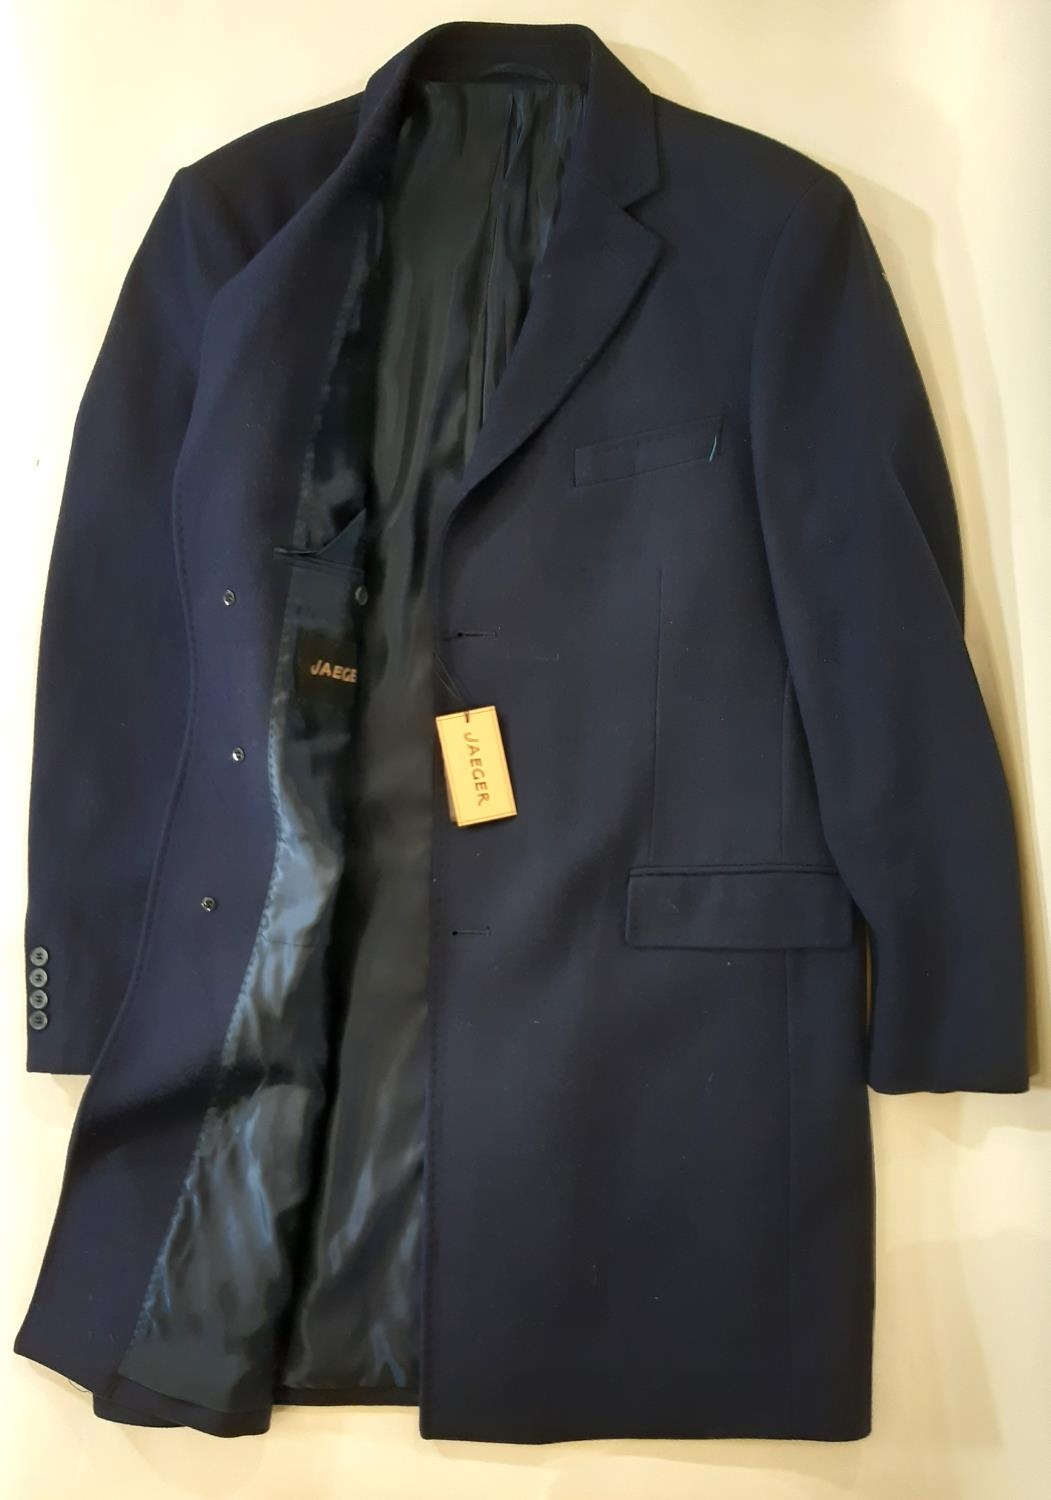 4 good quality men's coats like new with tags including coats by Jaeger XL, Christiano Baldinucci - Image 2 of 4